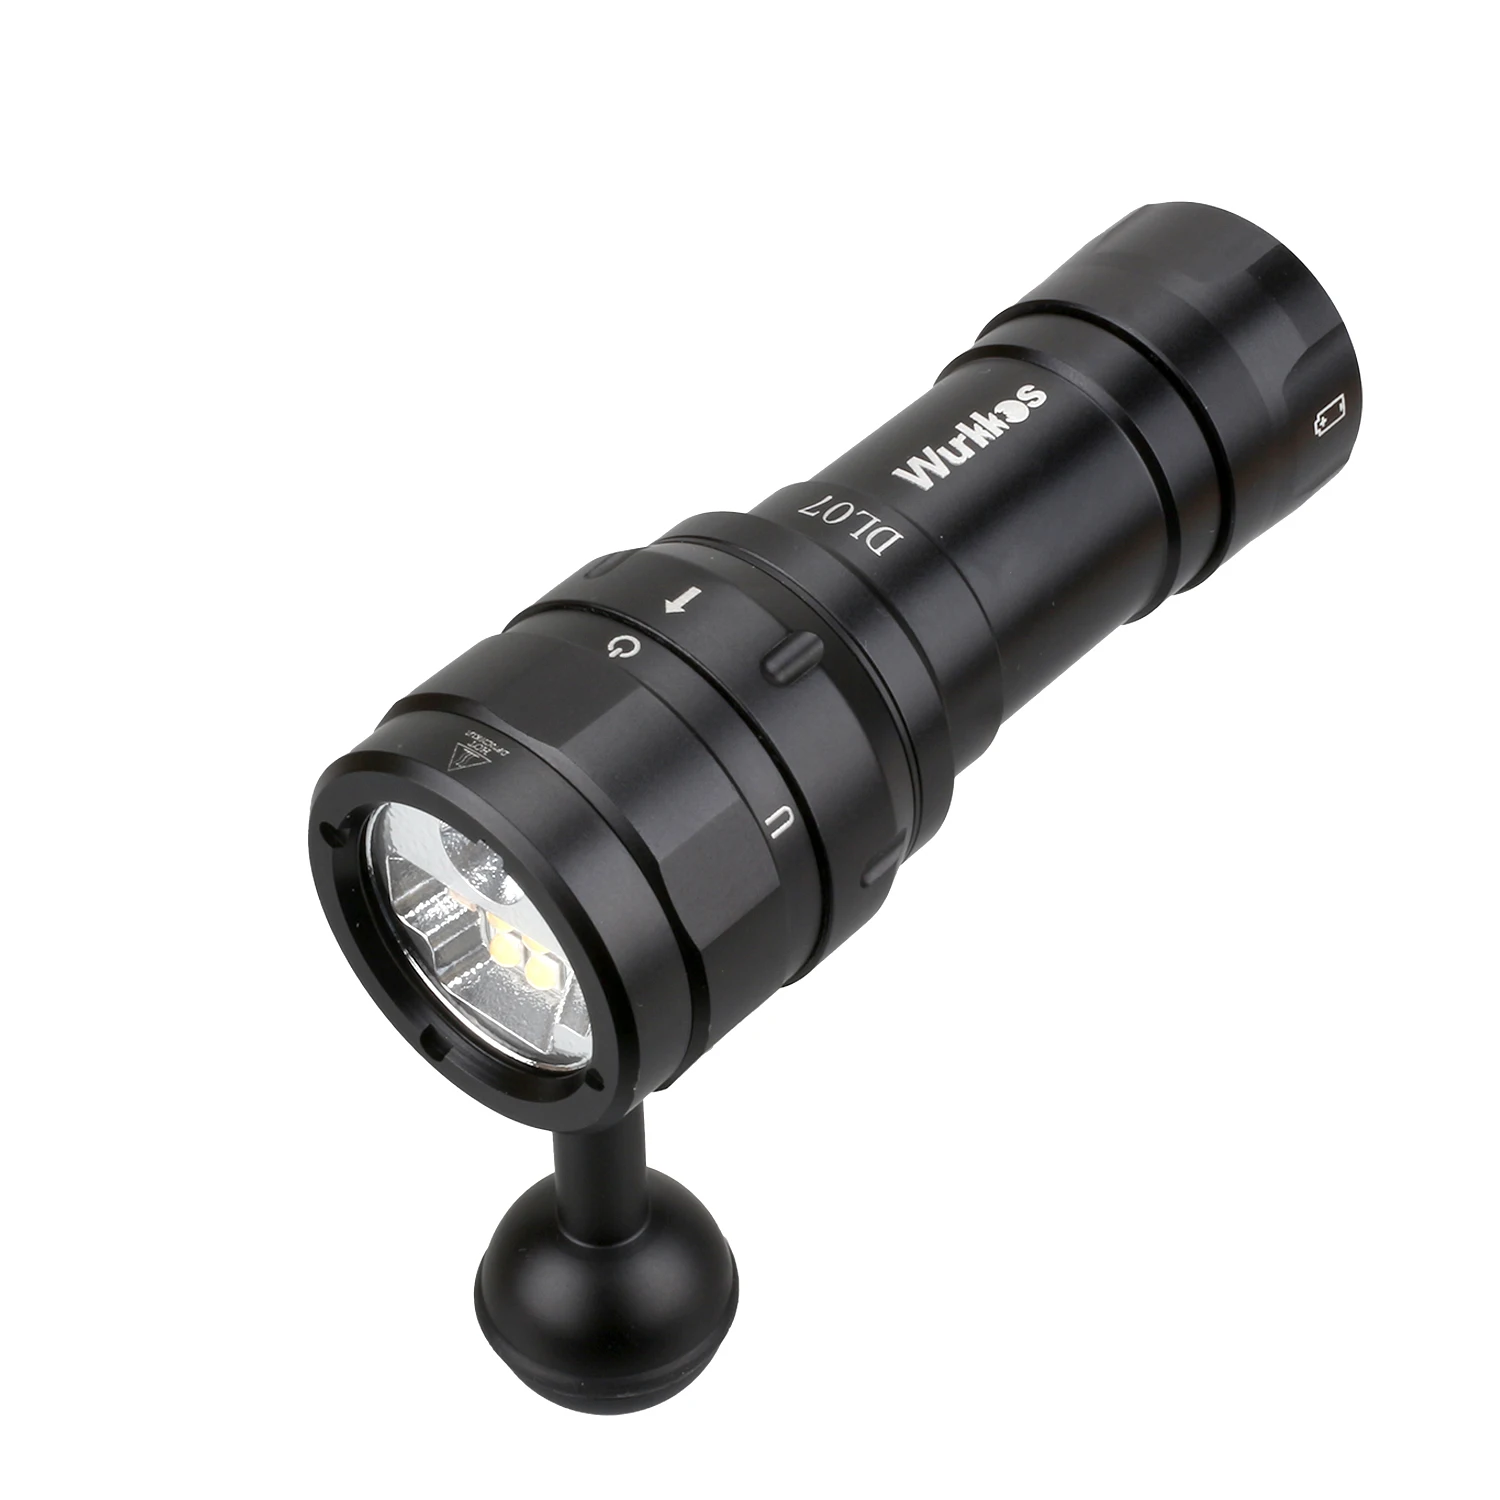 DL07 Diving Light Mulit Color LED White Red UV Flashlight Waterproof Powerful 26650 Torch,Flood and Spot,Magnet Switch